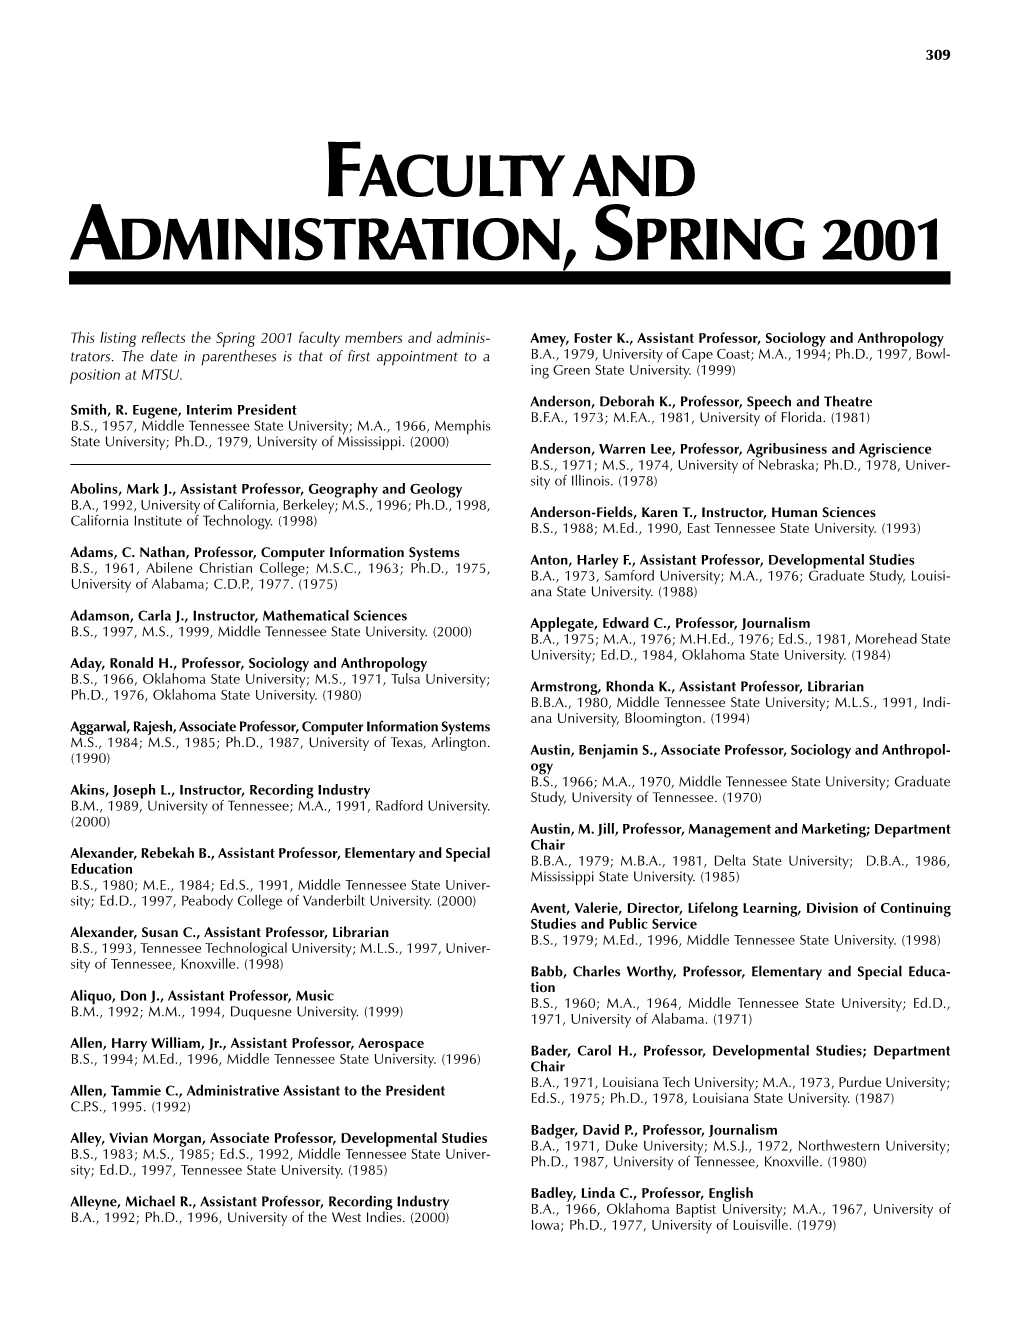 "Faculty and Administration," Spring 2001